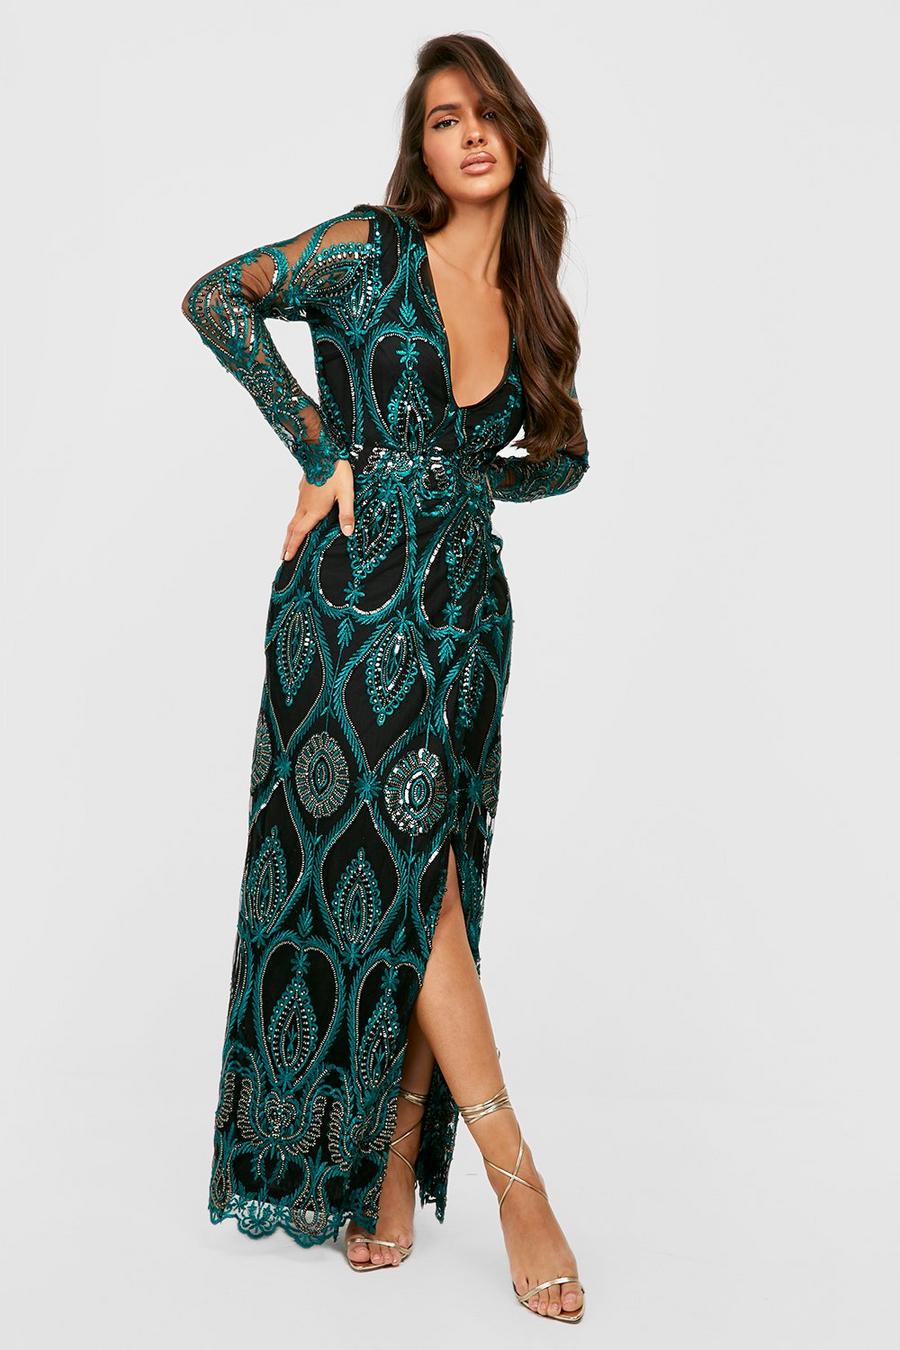 Emerald green Damask Plunge Maxi Party Dress